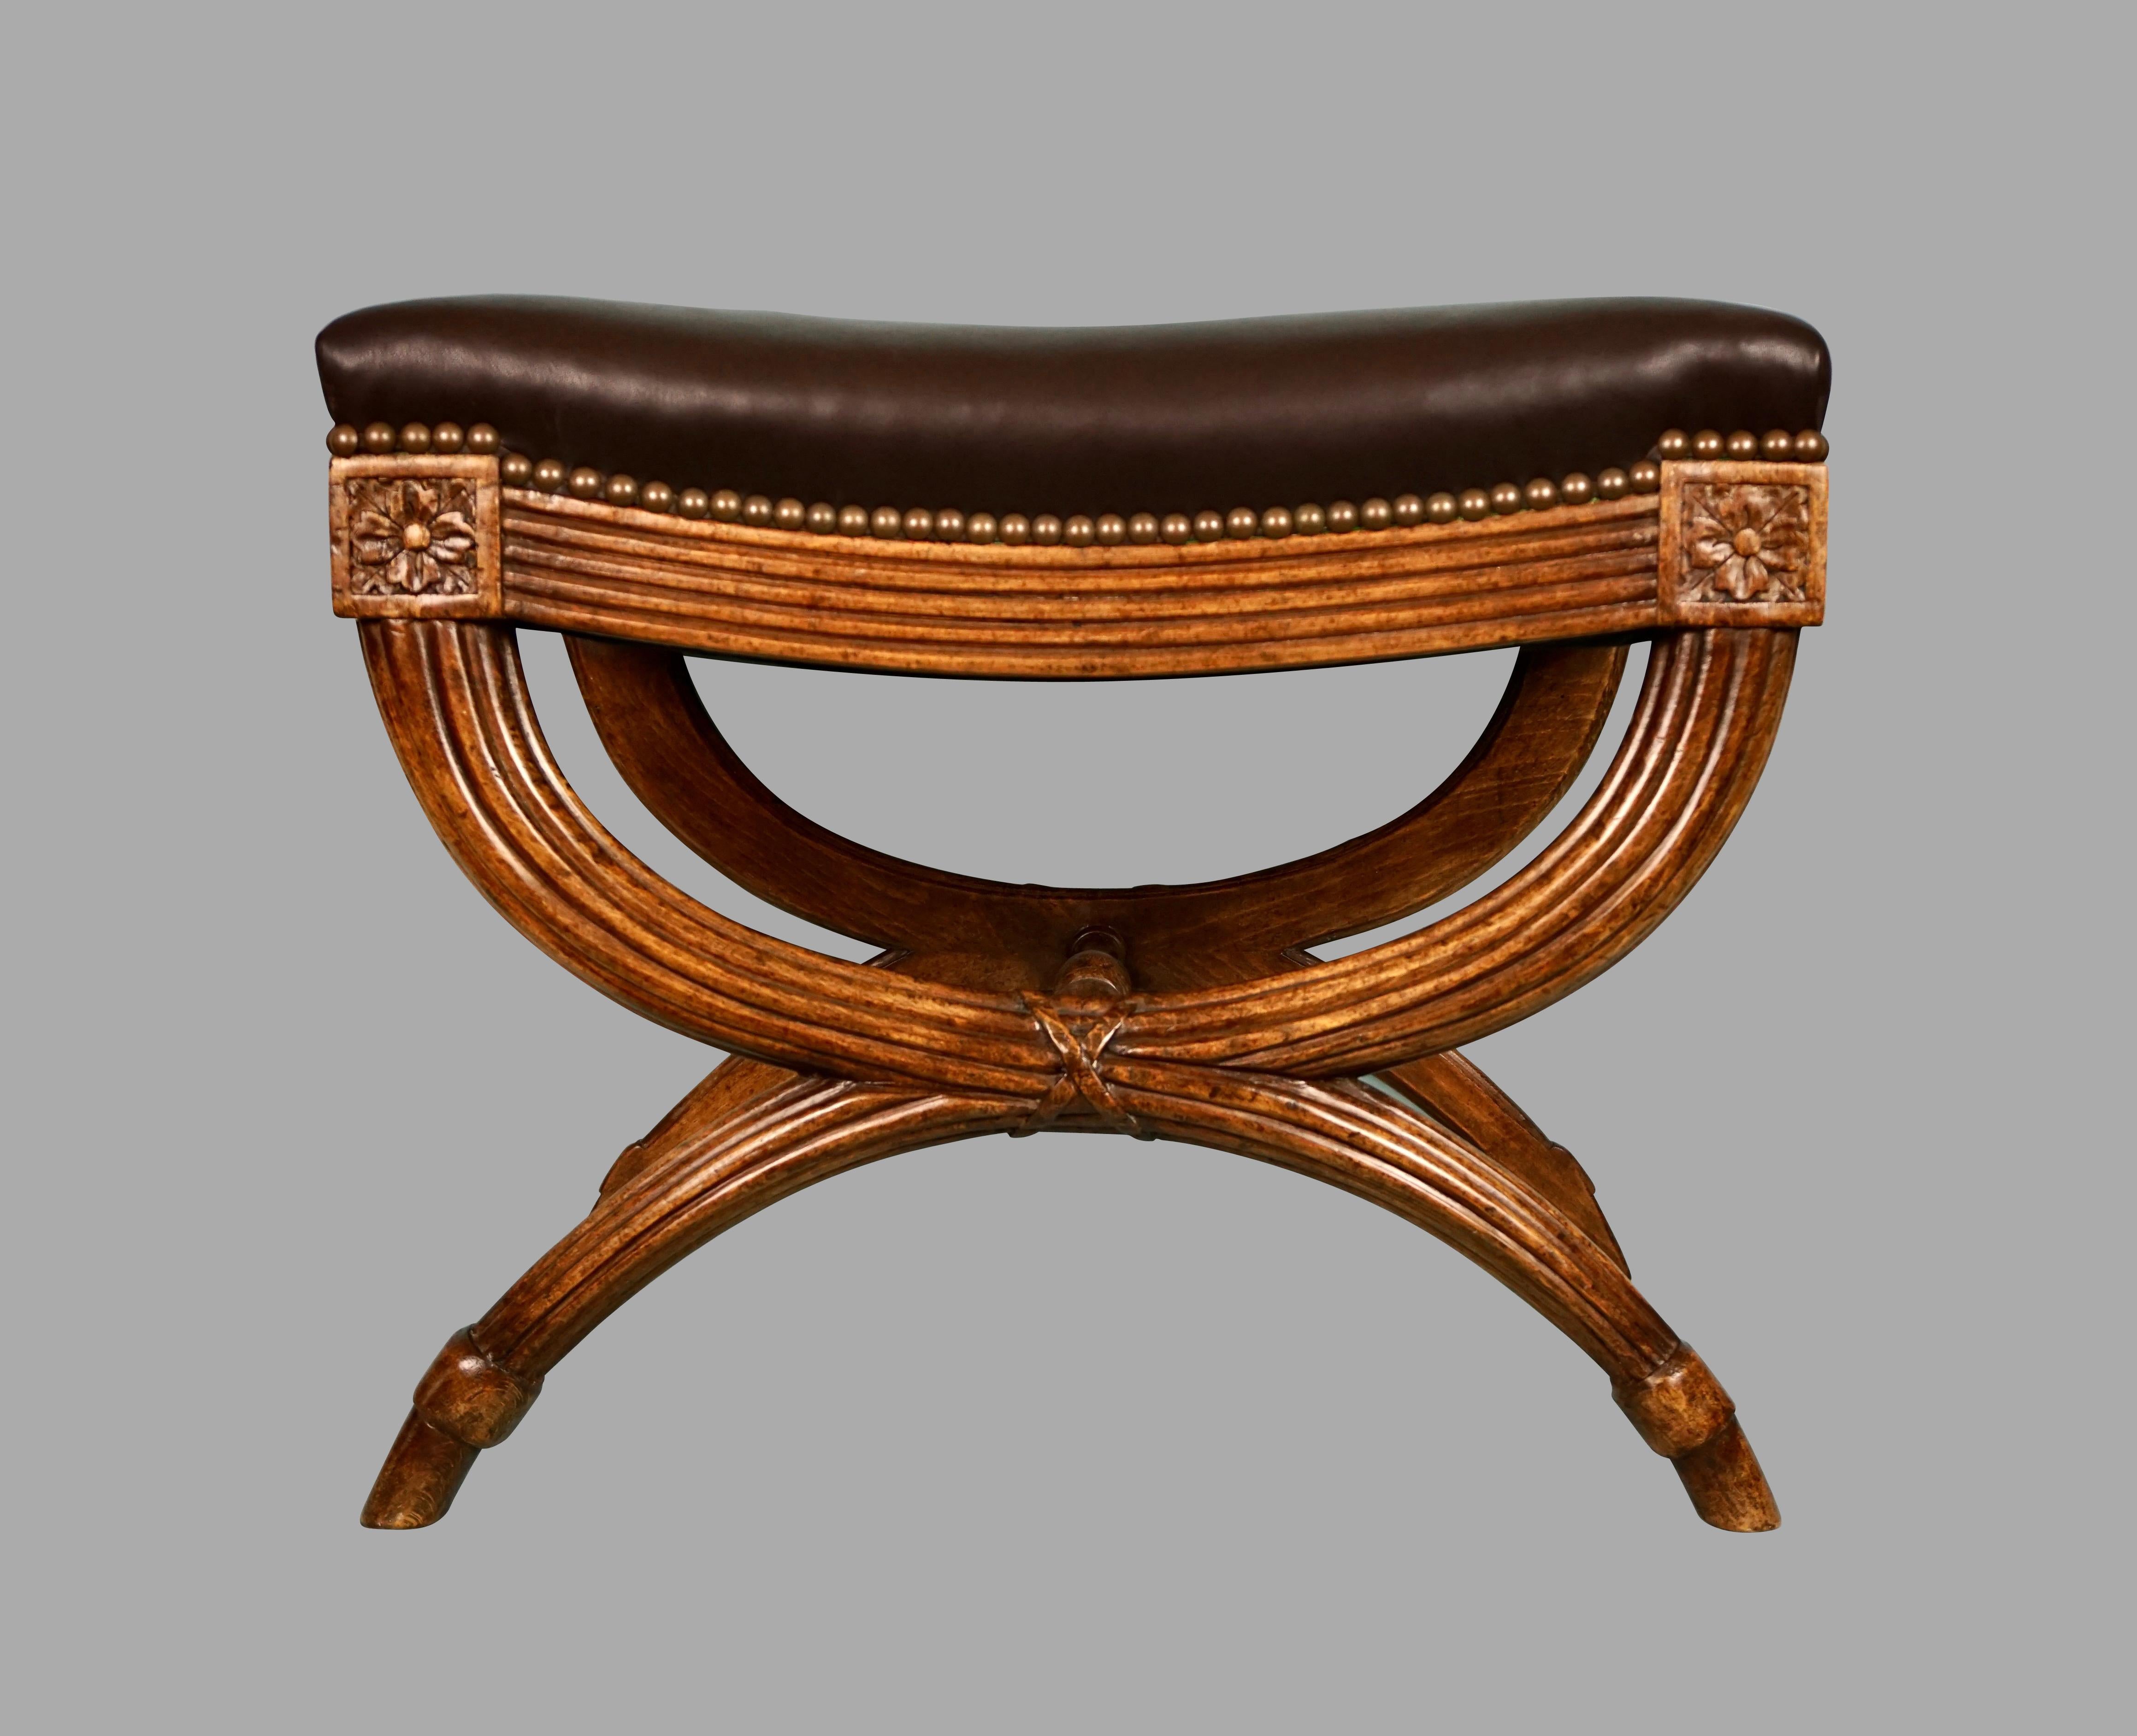 English Regency Style Curule Form Mahogany Bench with Black Leather Seat